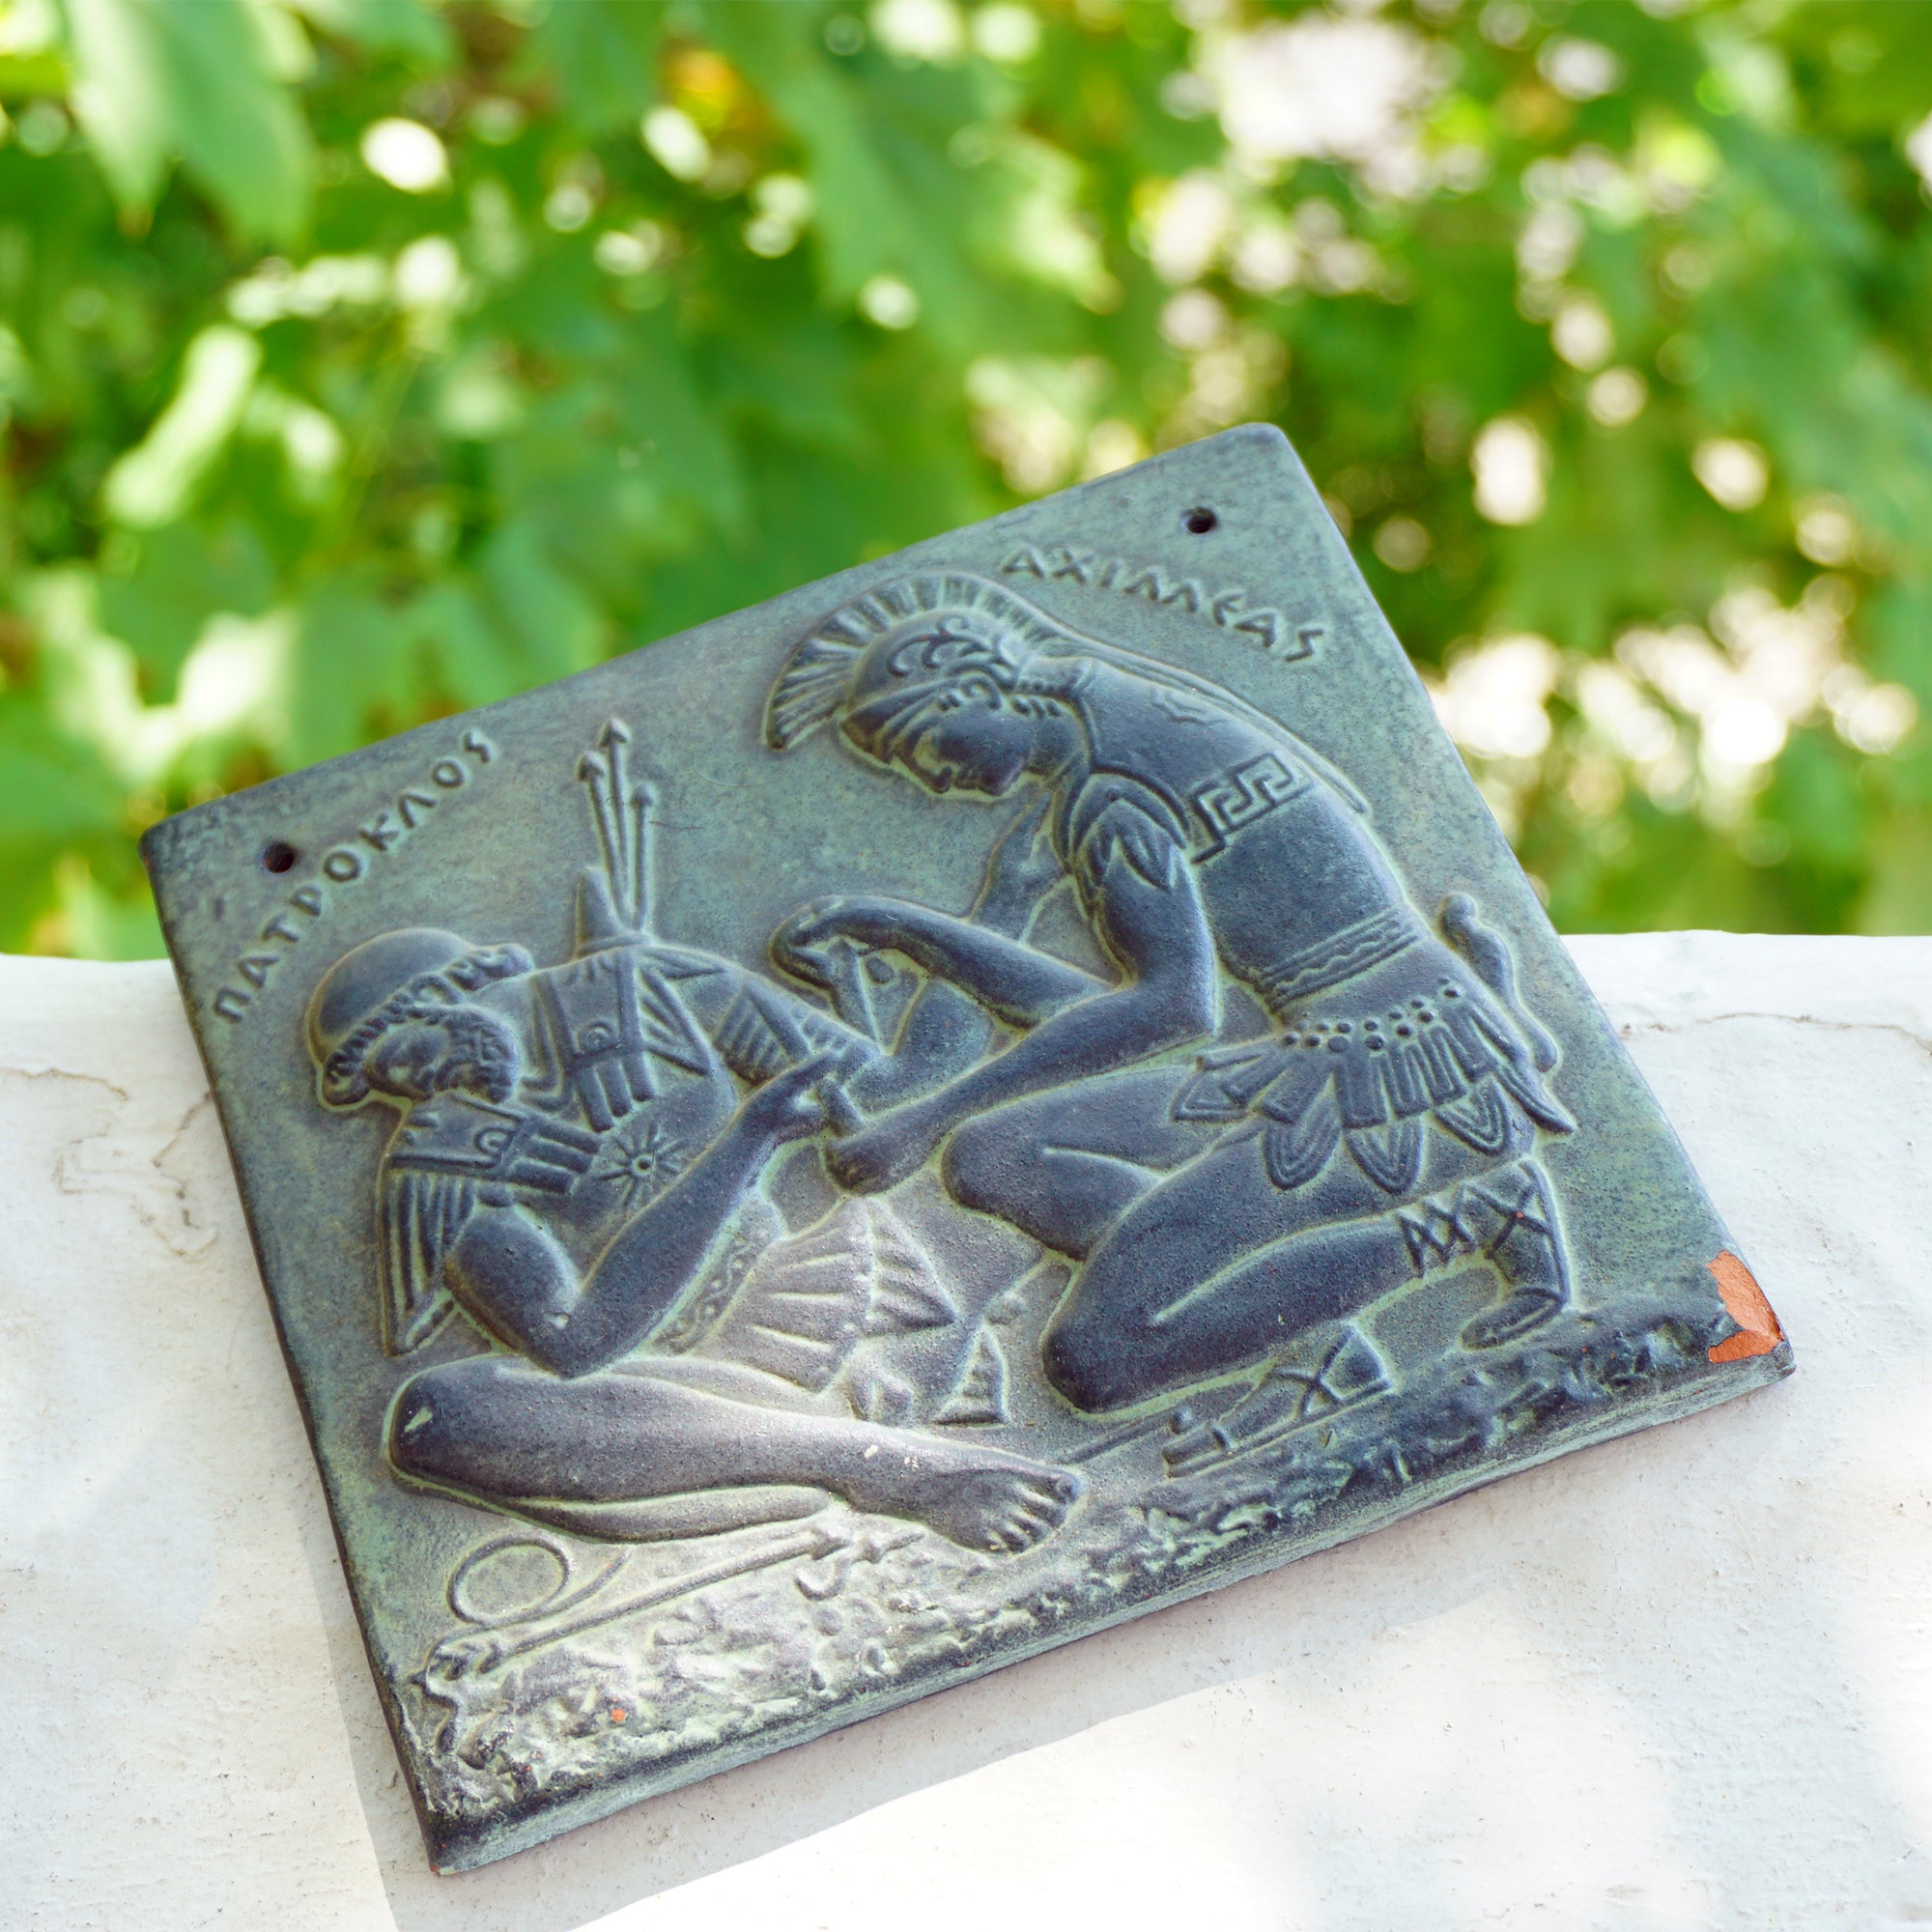 Vintage Collectible Trojan Heros Achilles & Patroclus Stone Bronze Painted Plaque, No.55. Made in Greece.